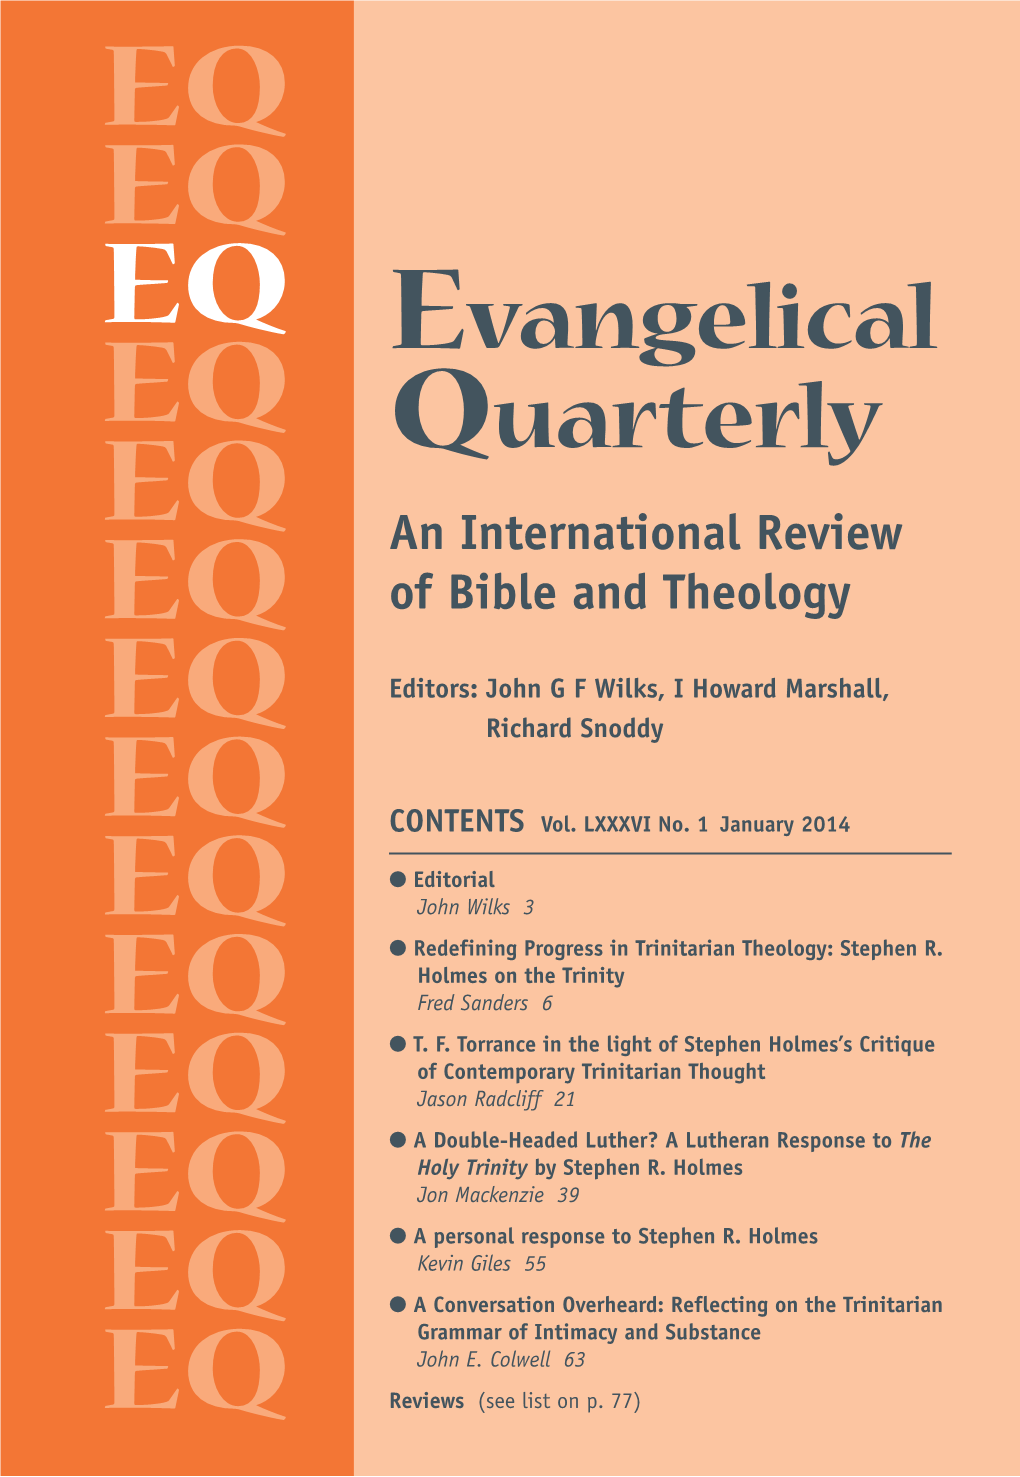 EVANGELICAL QUARTERLY / Volume LXXXV / No.1 January 2014 EQ EQ EQ Evangelical EQ Quarterly EQ an International Review EQ of Bible and Theology